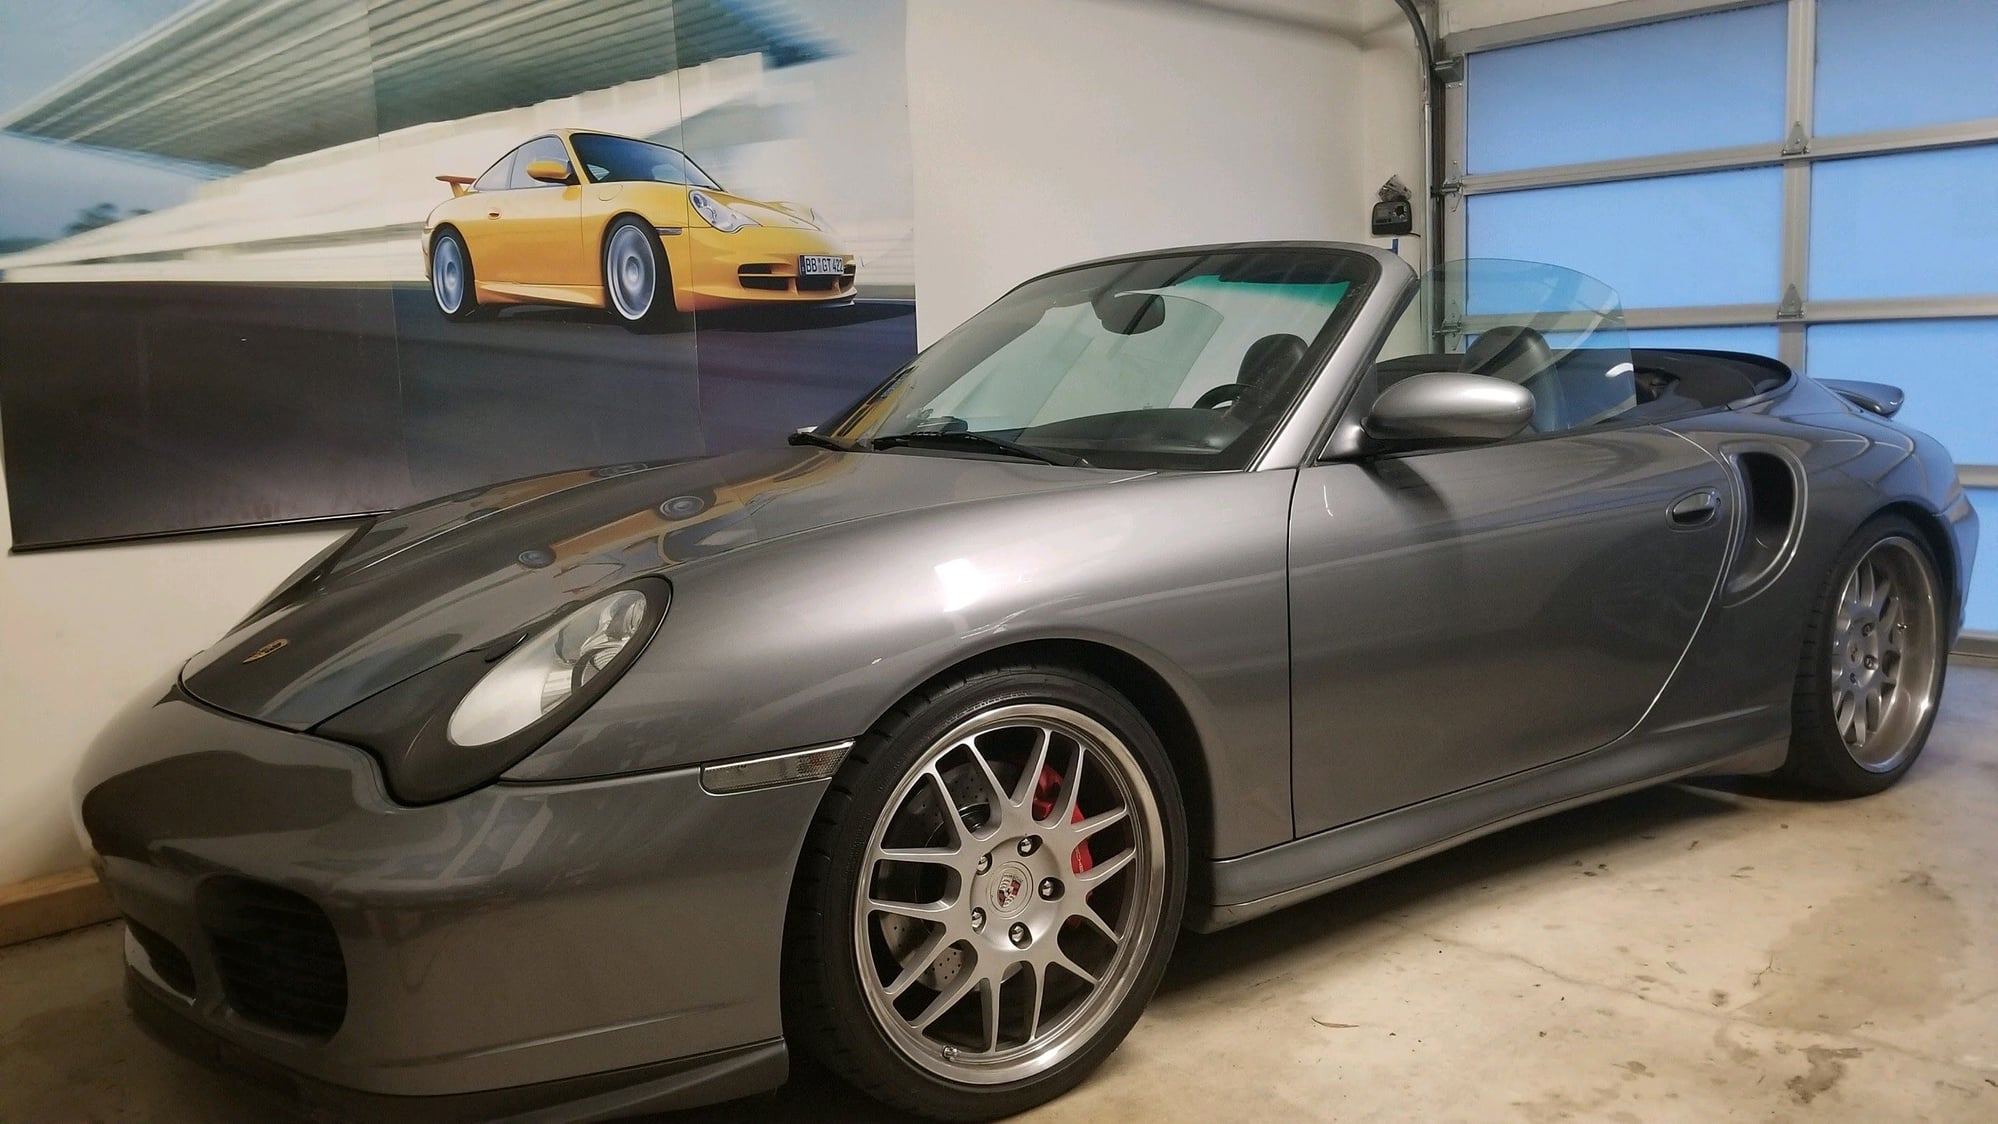 2004 Porsche 911 - 2004 6 Speed Turbo Cab, 59k miles, Ohlins coil-overs, Cobb tune, $45,000. - Used - VIN WWWWWWWWWWWWWWWWW - 59,600 Miles - 6 cyl - AWD - Manual - Convertible - Gray - Beverly Hills, CA 90210, United States